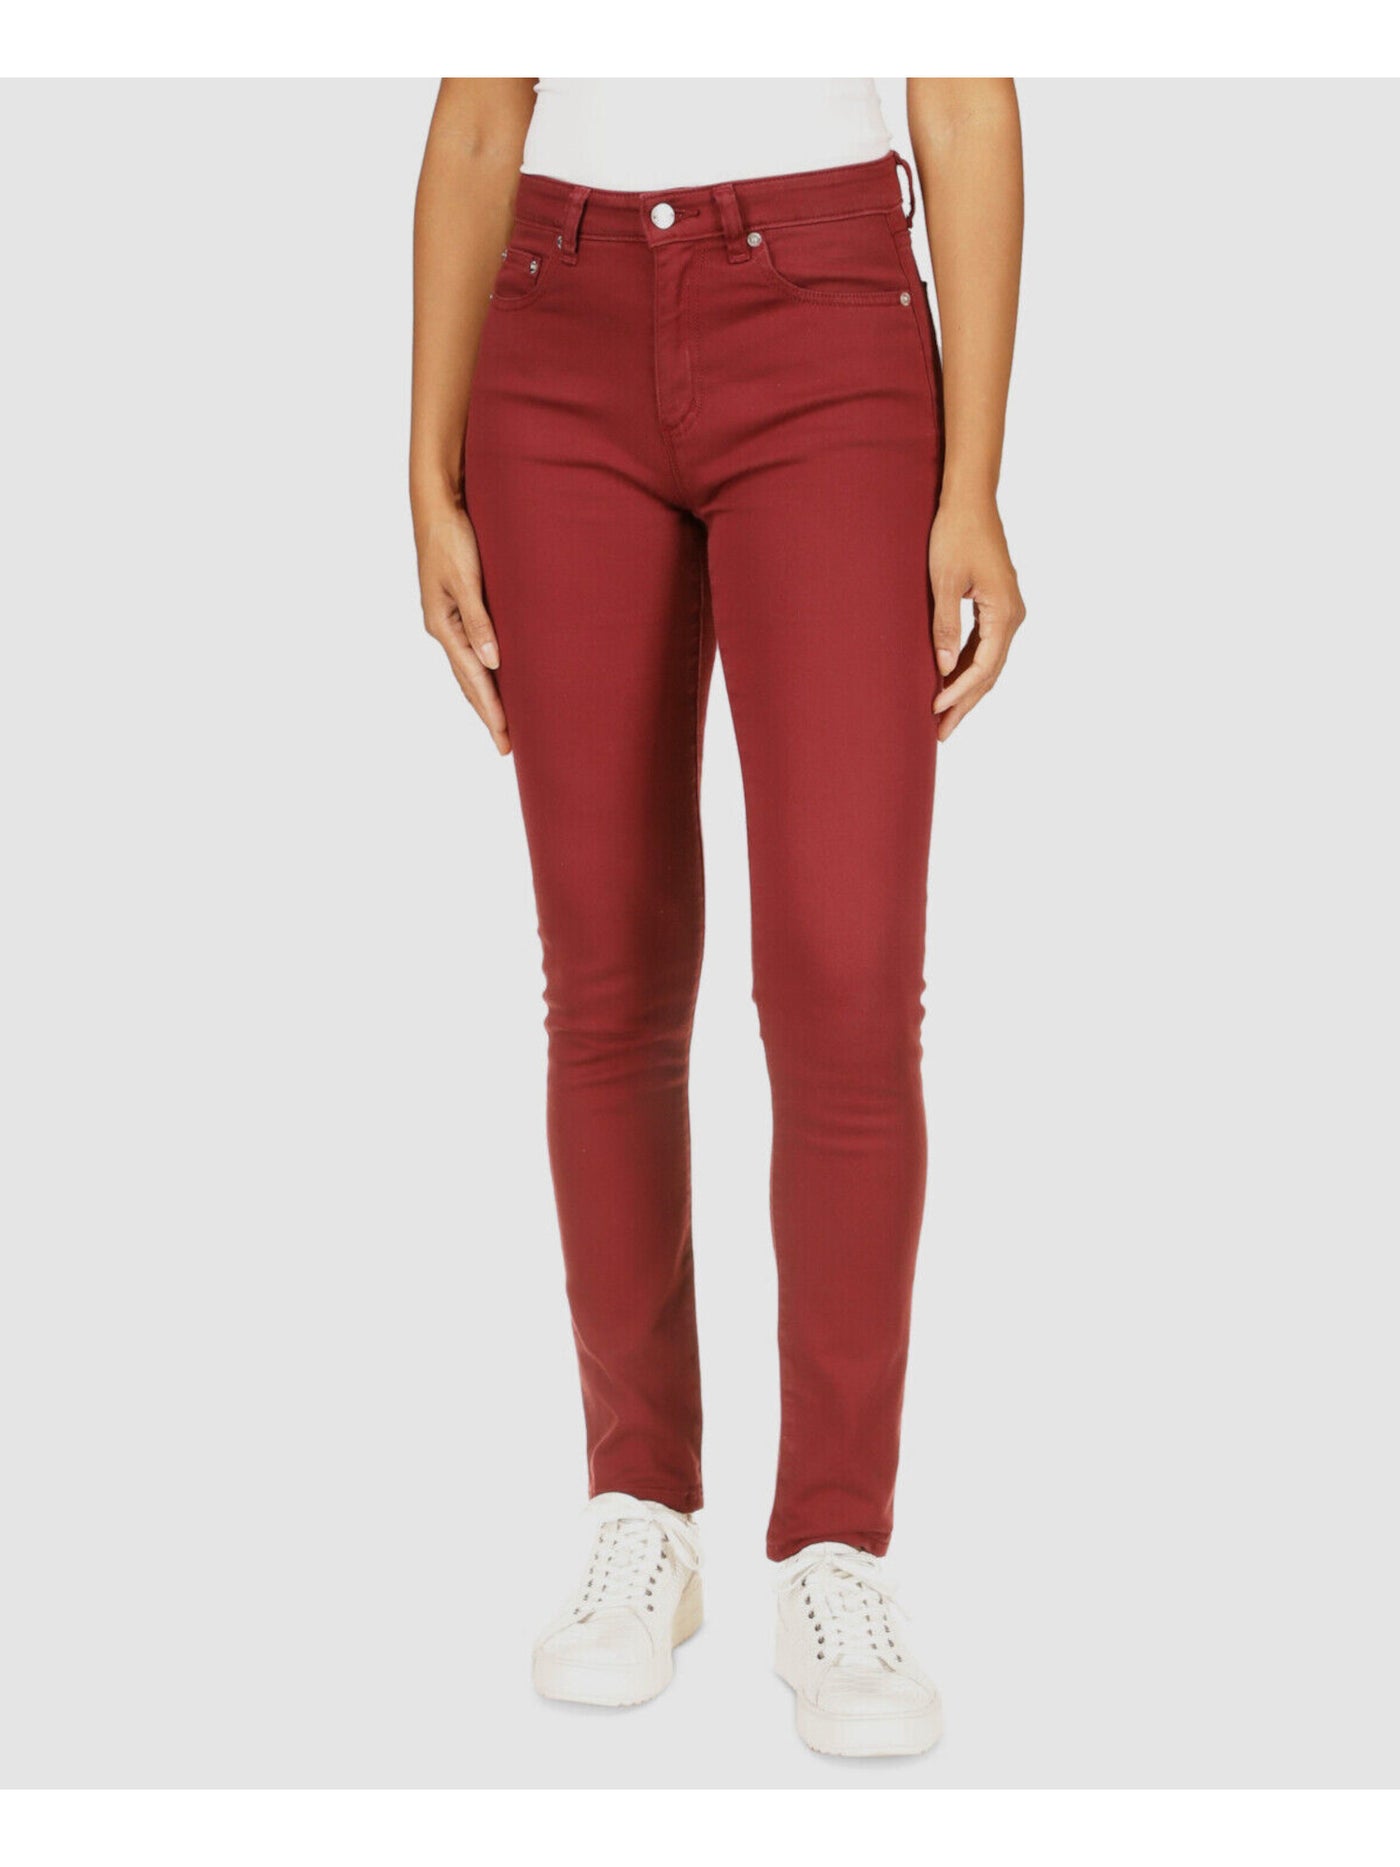 MICHAEL MICHAEL KORS Womens Maroon Pocketed Zippered Button Closure Skinny Jeans 6